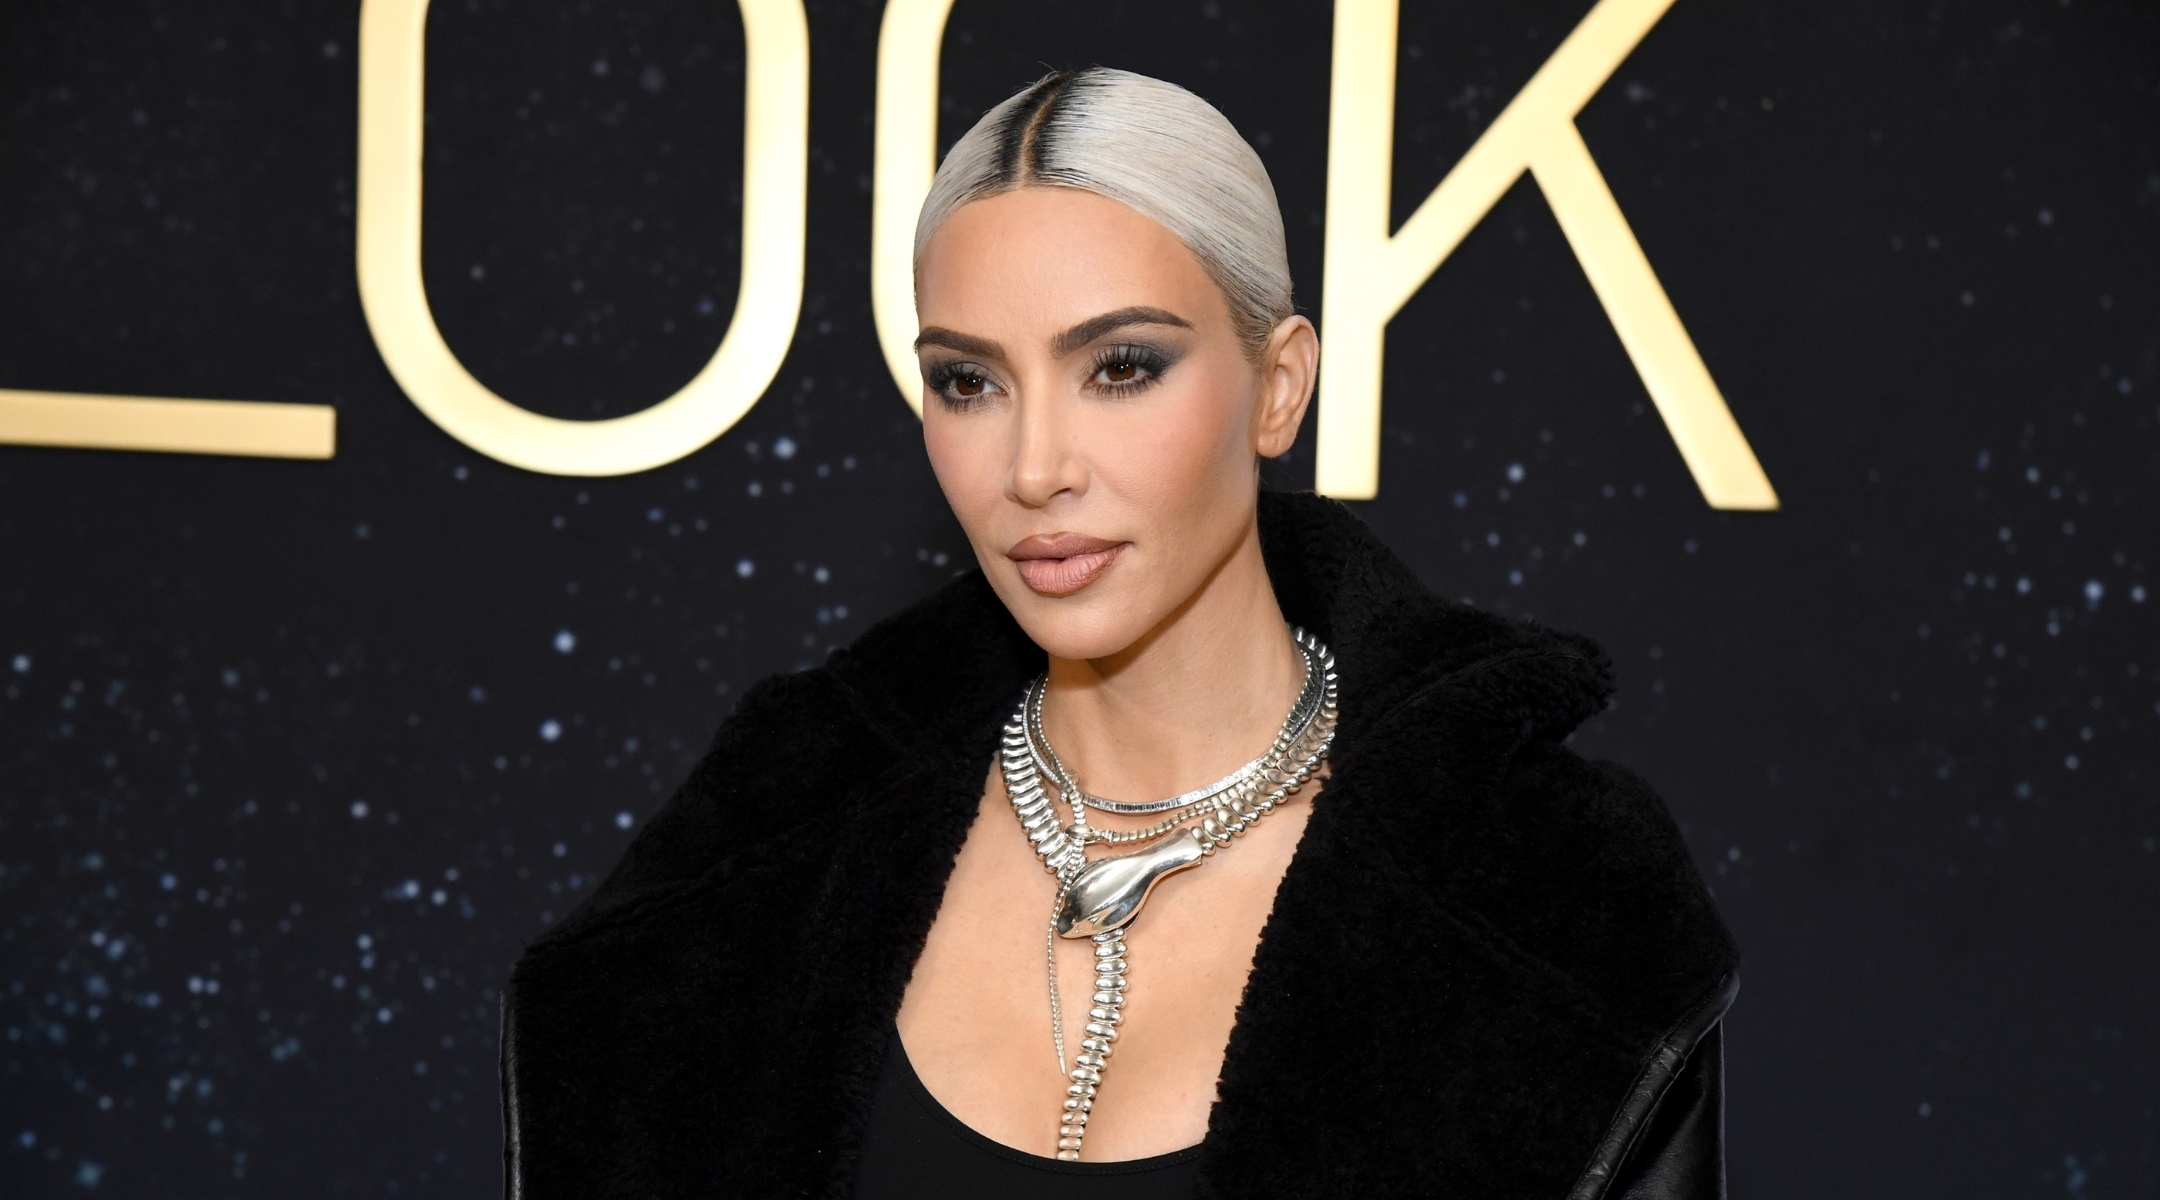 Kim Kardashian attends an event in Oct. 2022, just days after ex-husband Ye made headlines for his alarming antisemitic comments. (Jon Kopaloff/Getty Images for Tiffany & Co.)